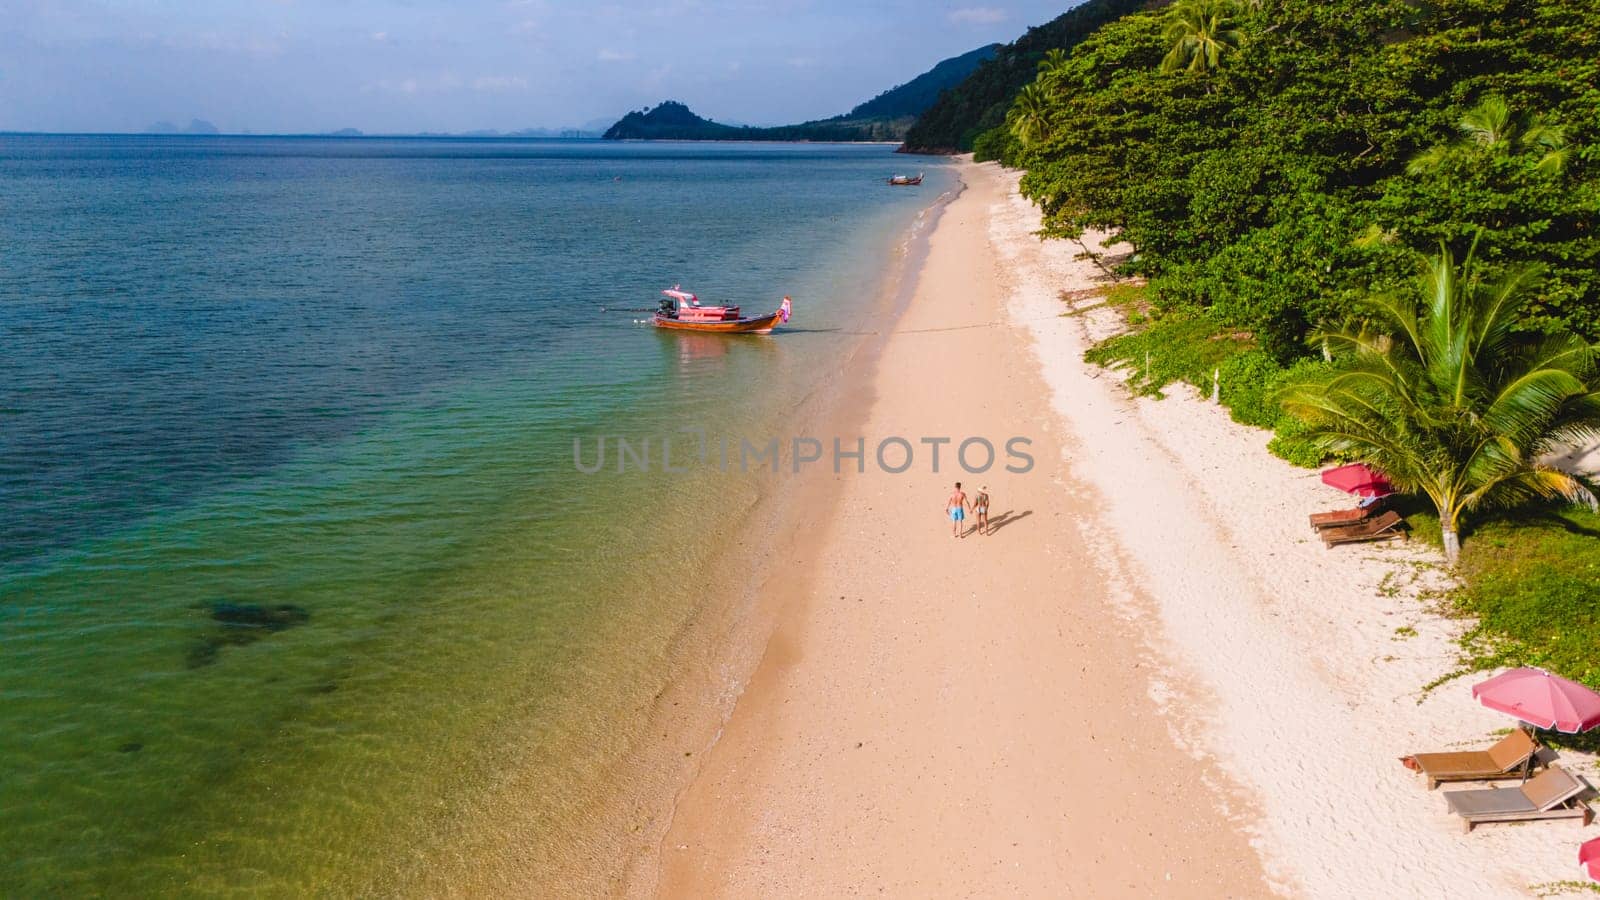 A beautiful view of a calm beach with crystal clear water on the blue sky at Koh Libong, Trang province, Thailand, Andaman Sea. A couple of men and woman walking on the beach on a sunny evening